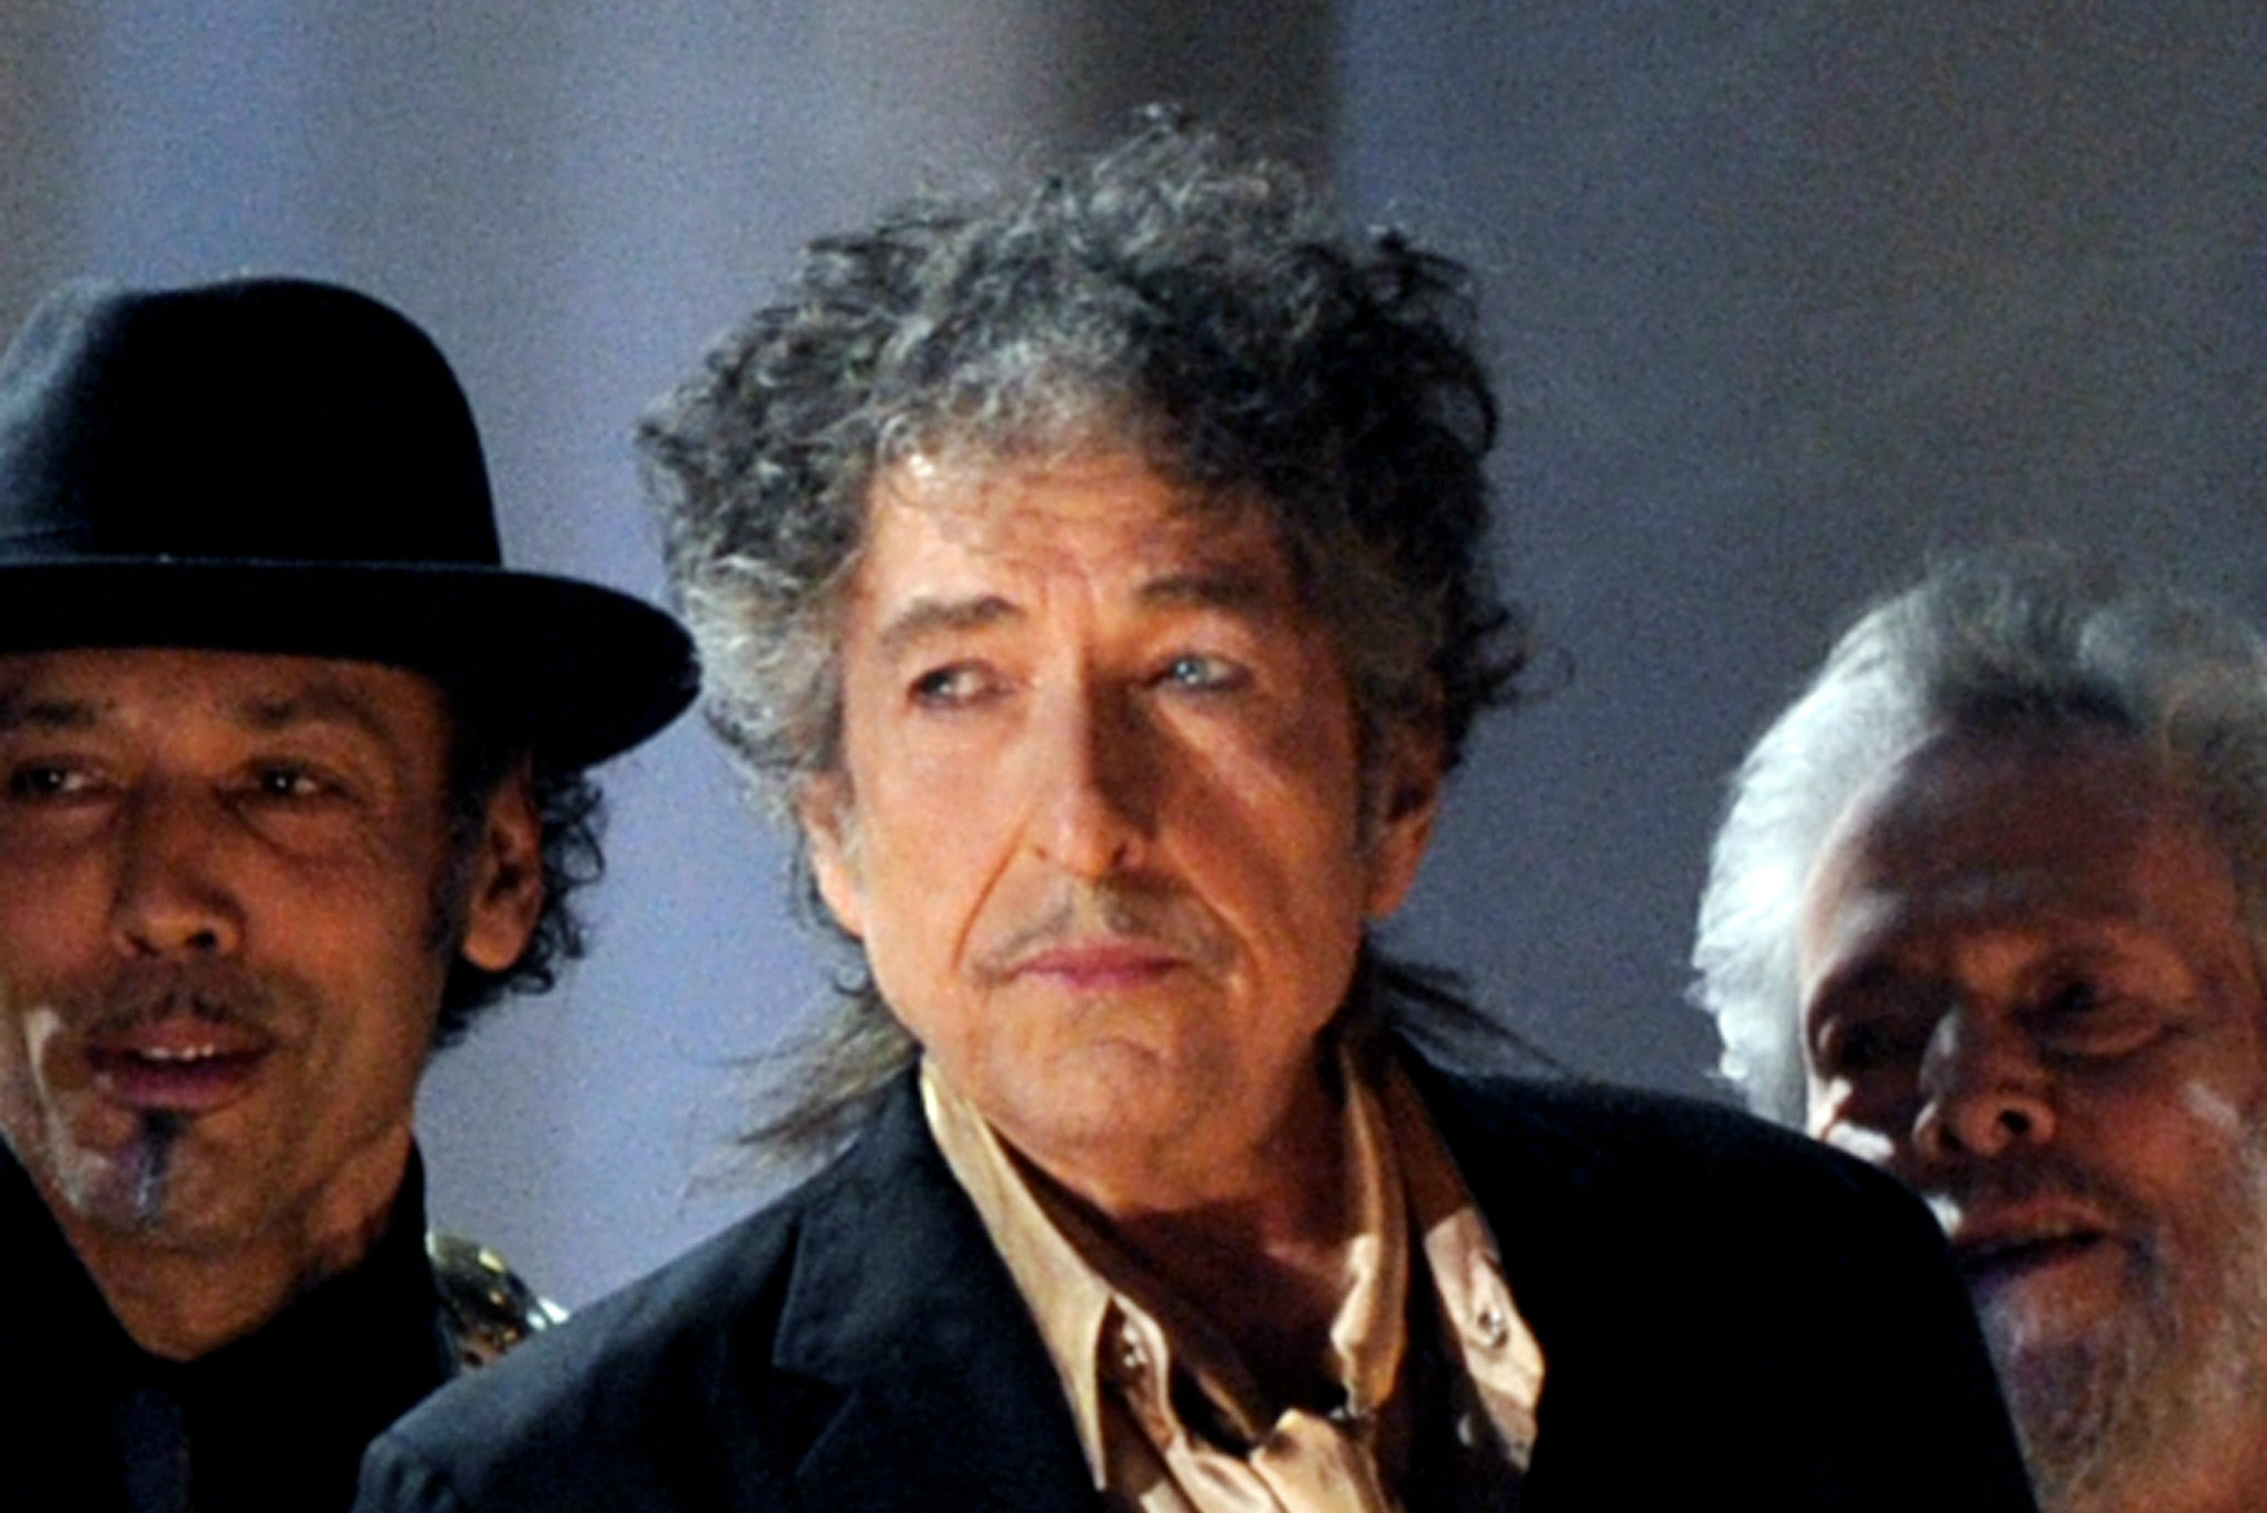 New Music: Stream Part of Bob Dylan’s The 1966 Live Recordings Box Set | SPIN